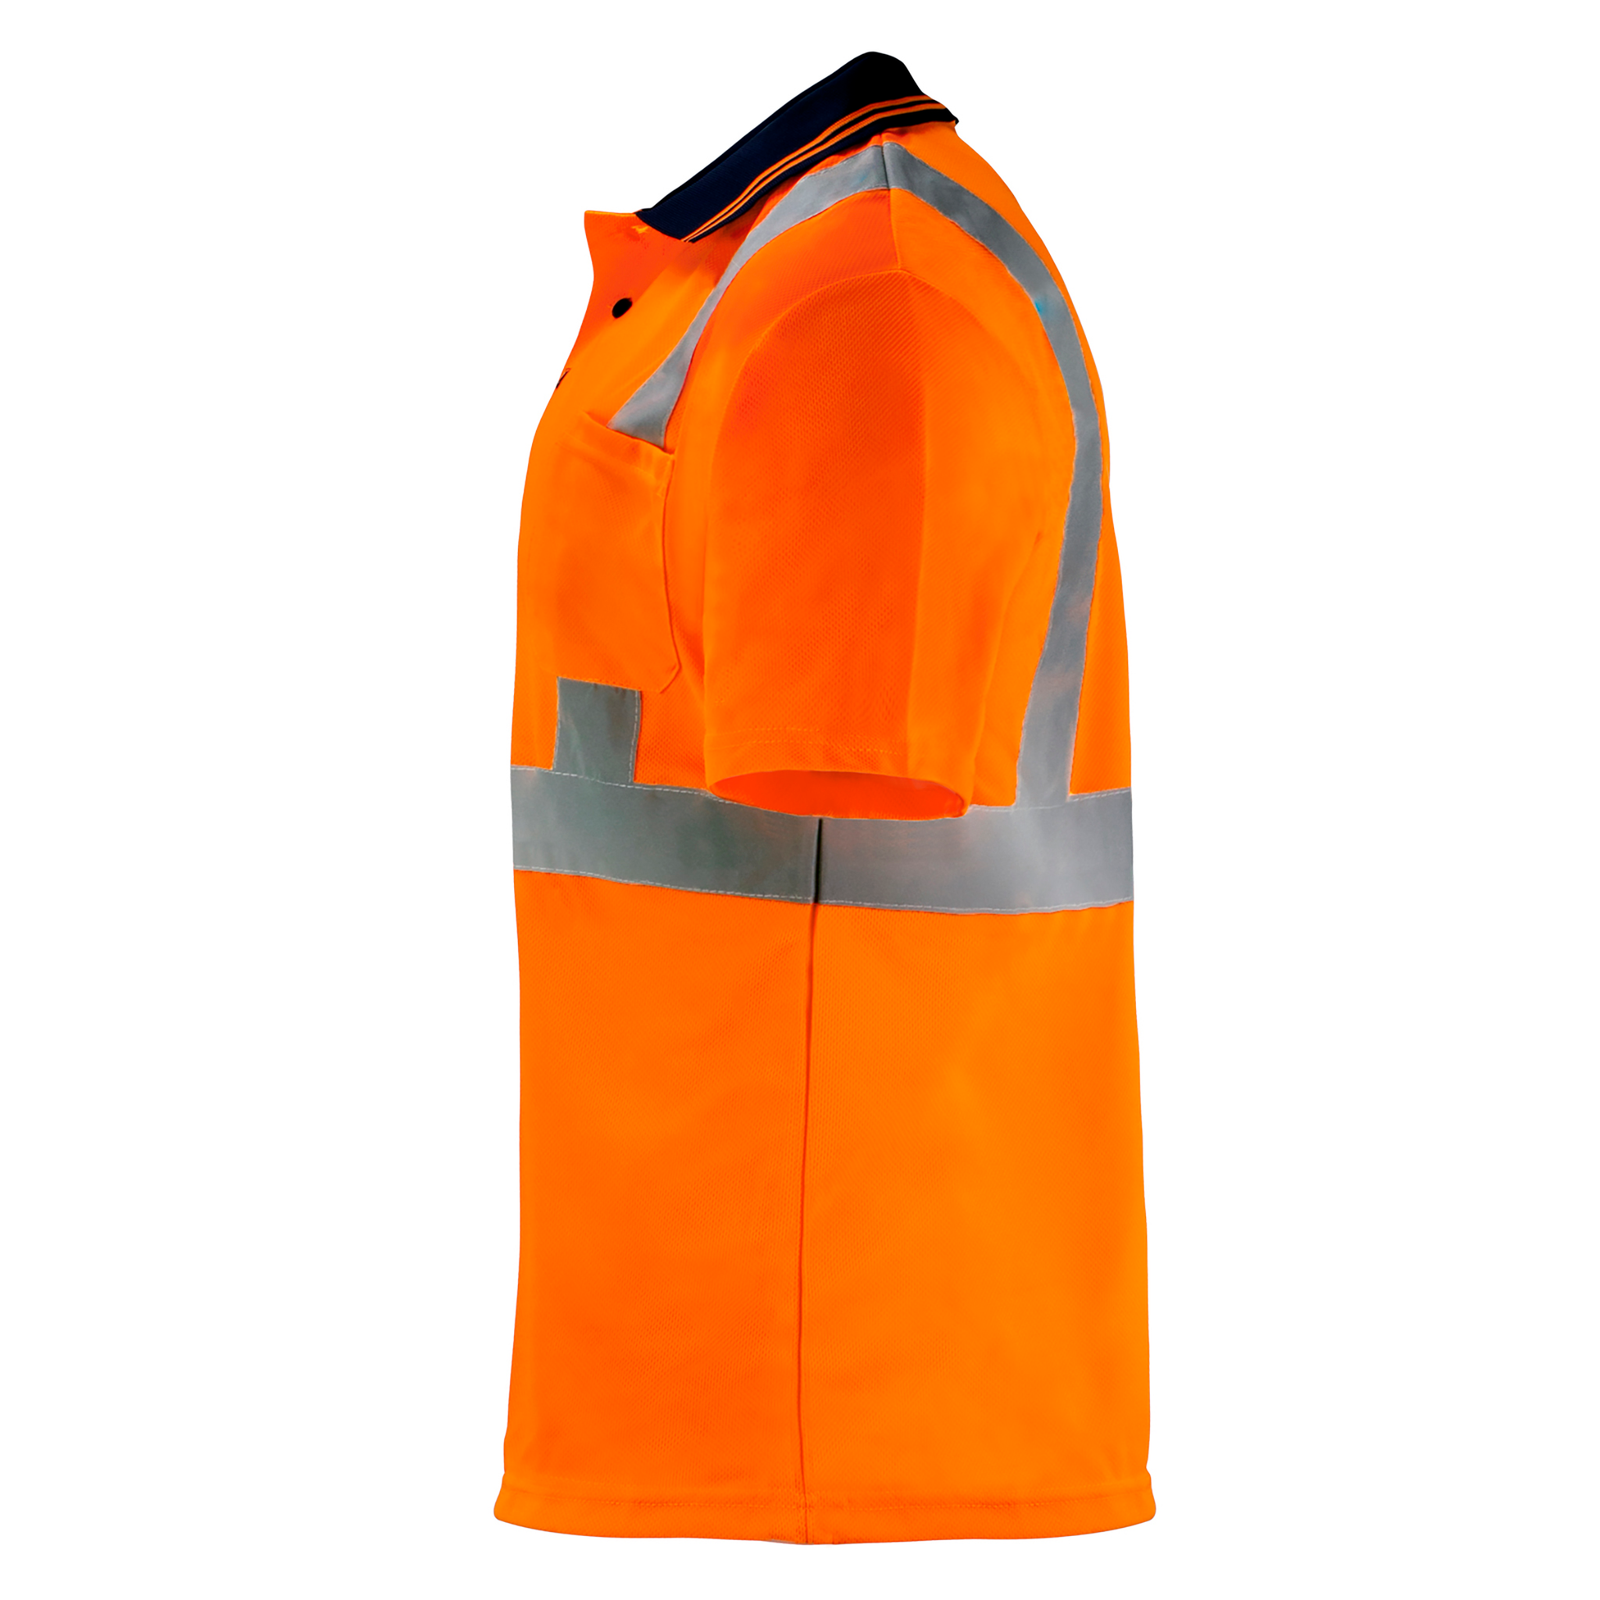 High visibility orange reflective safety polo shirt. The shirt is short sleeve, has a polo collar and 2 buttons.